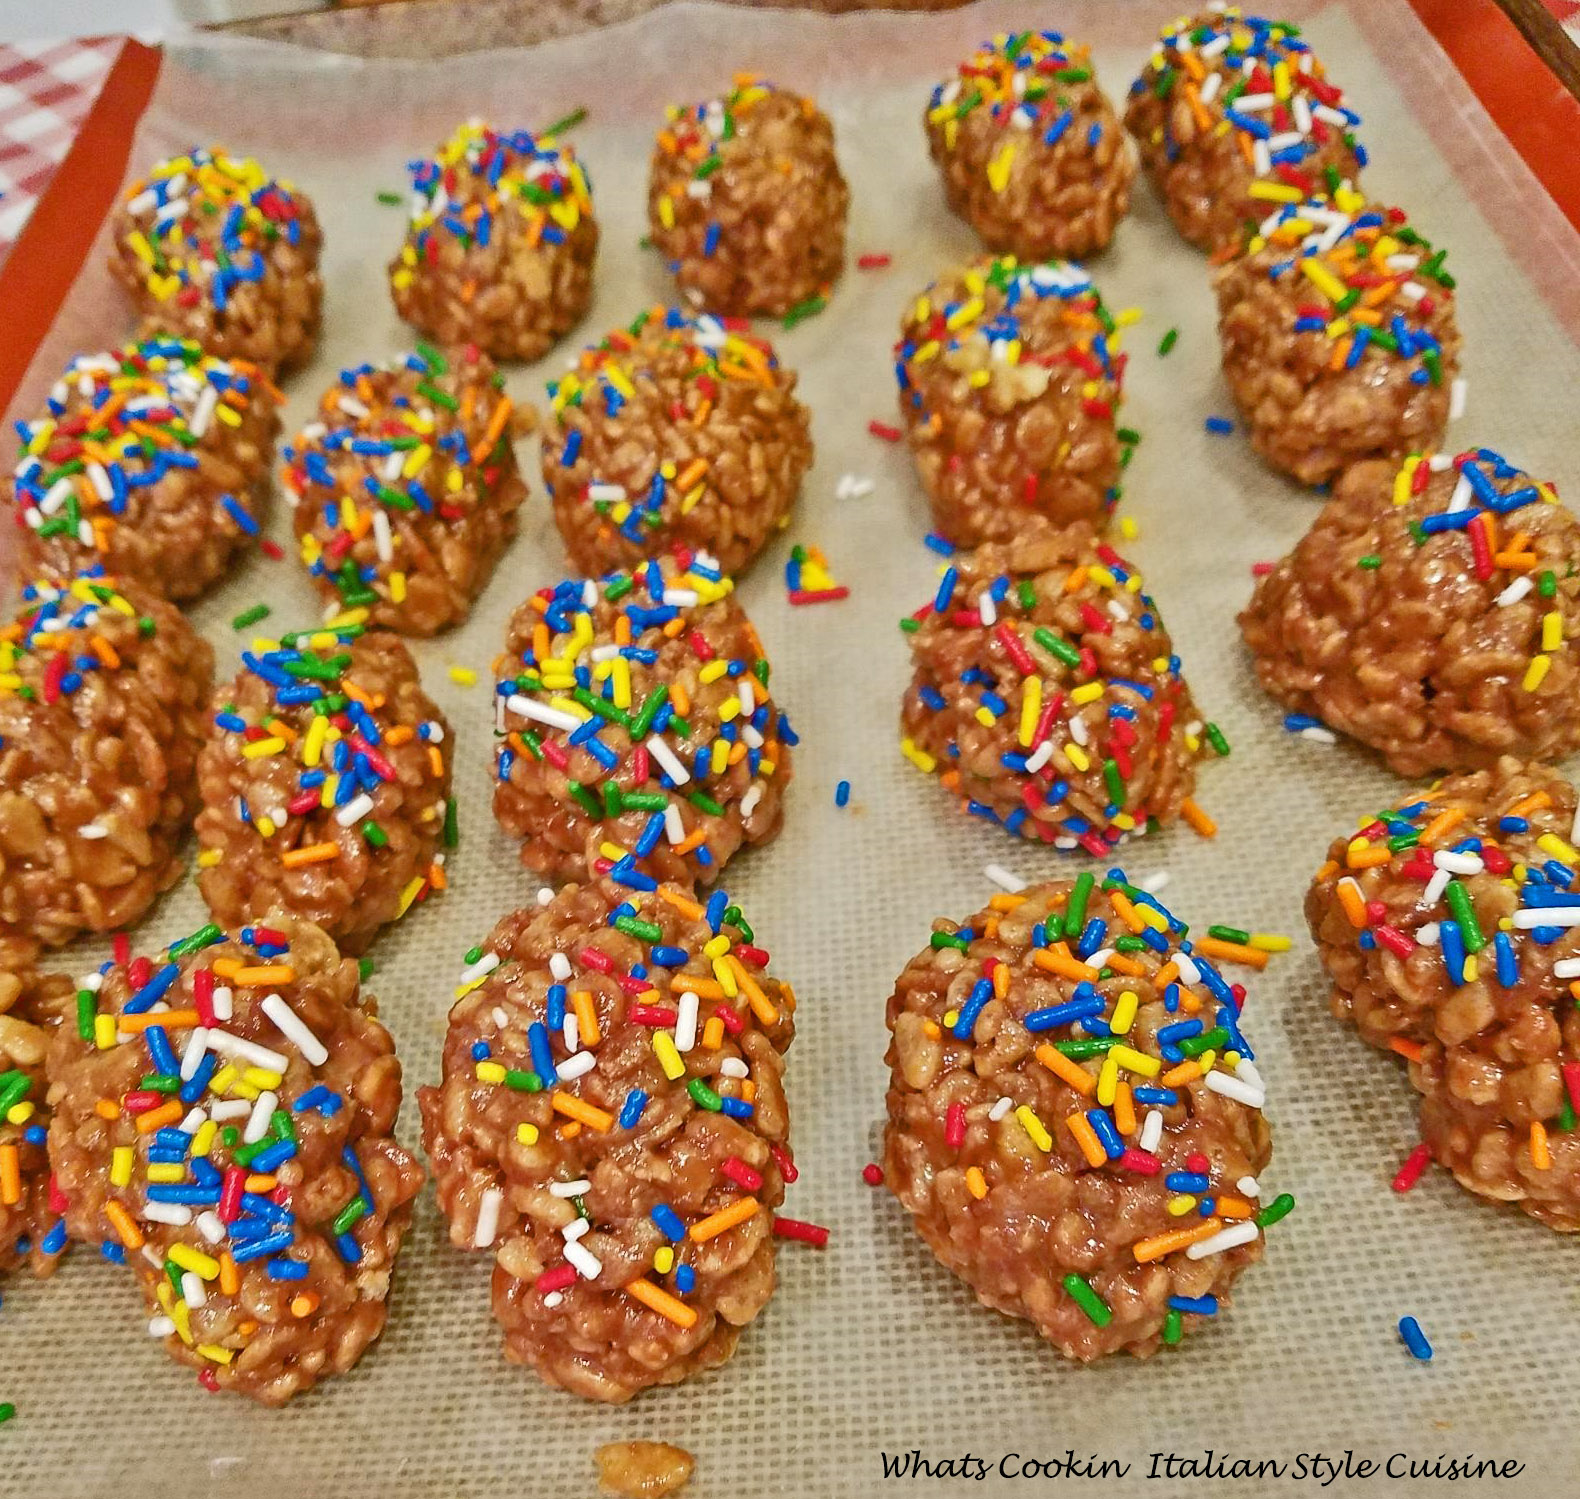 Peanut butter rice krispies and peanut butter cups all in one shaped Easter egg with sprinkles on top for a festive look. A no bake treat more like a candy than a cookie